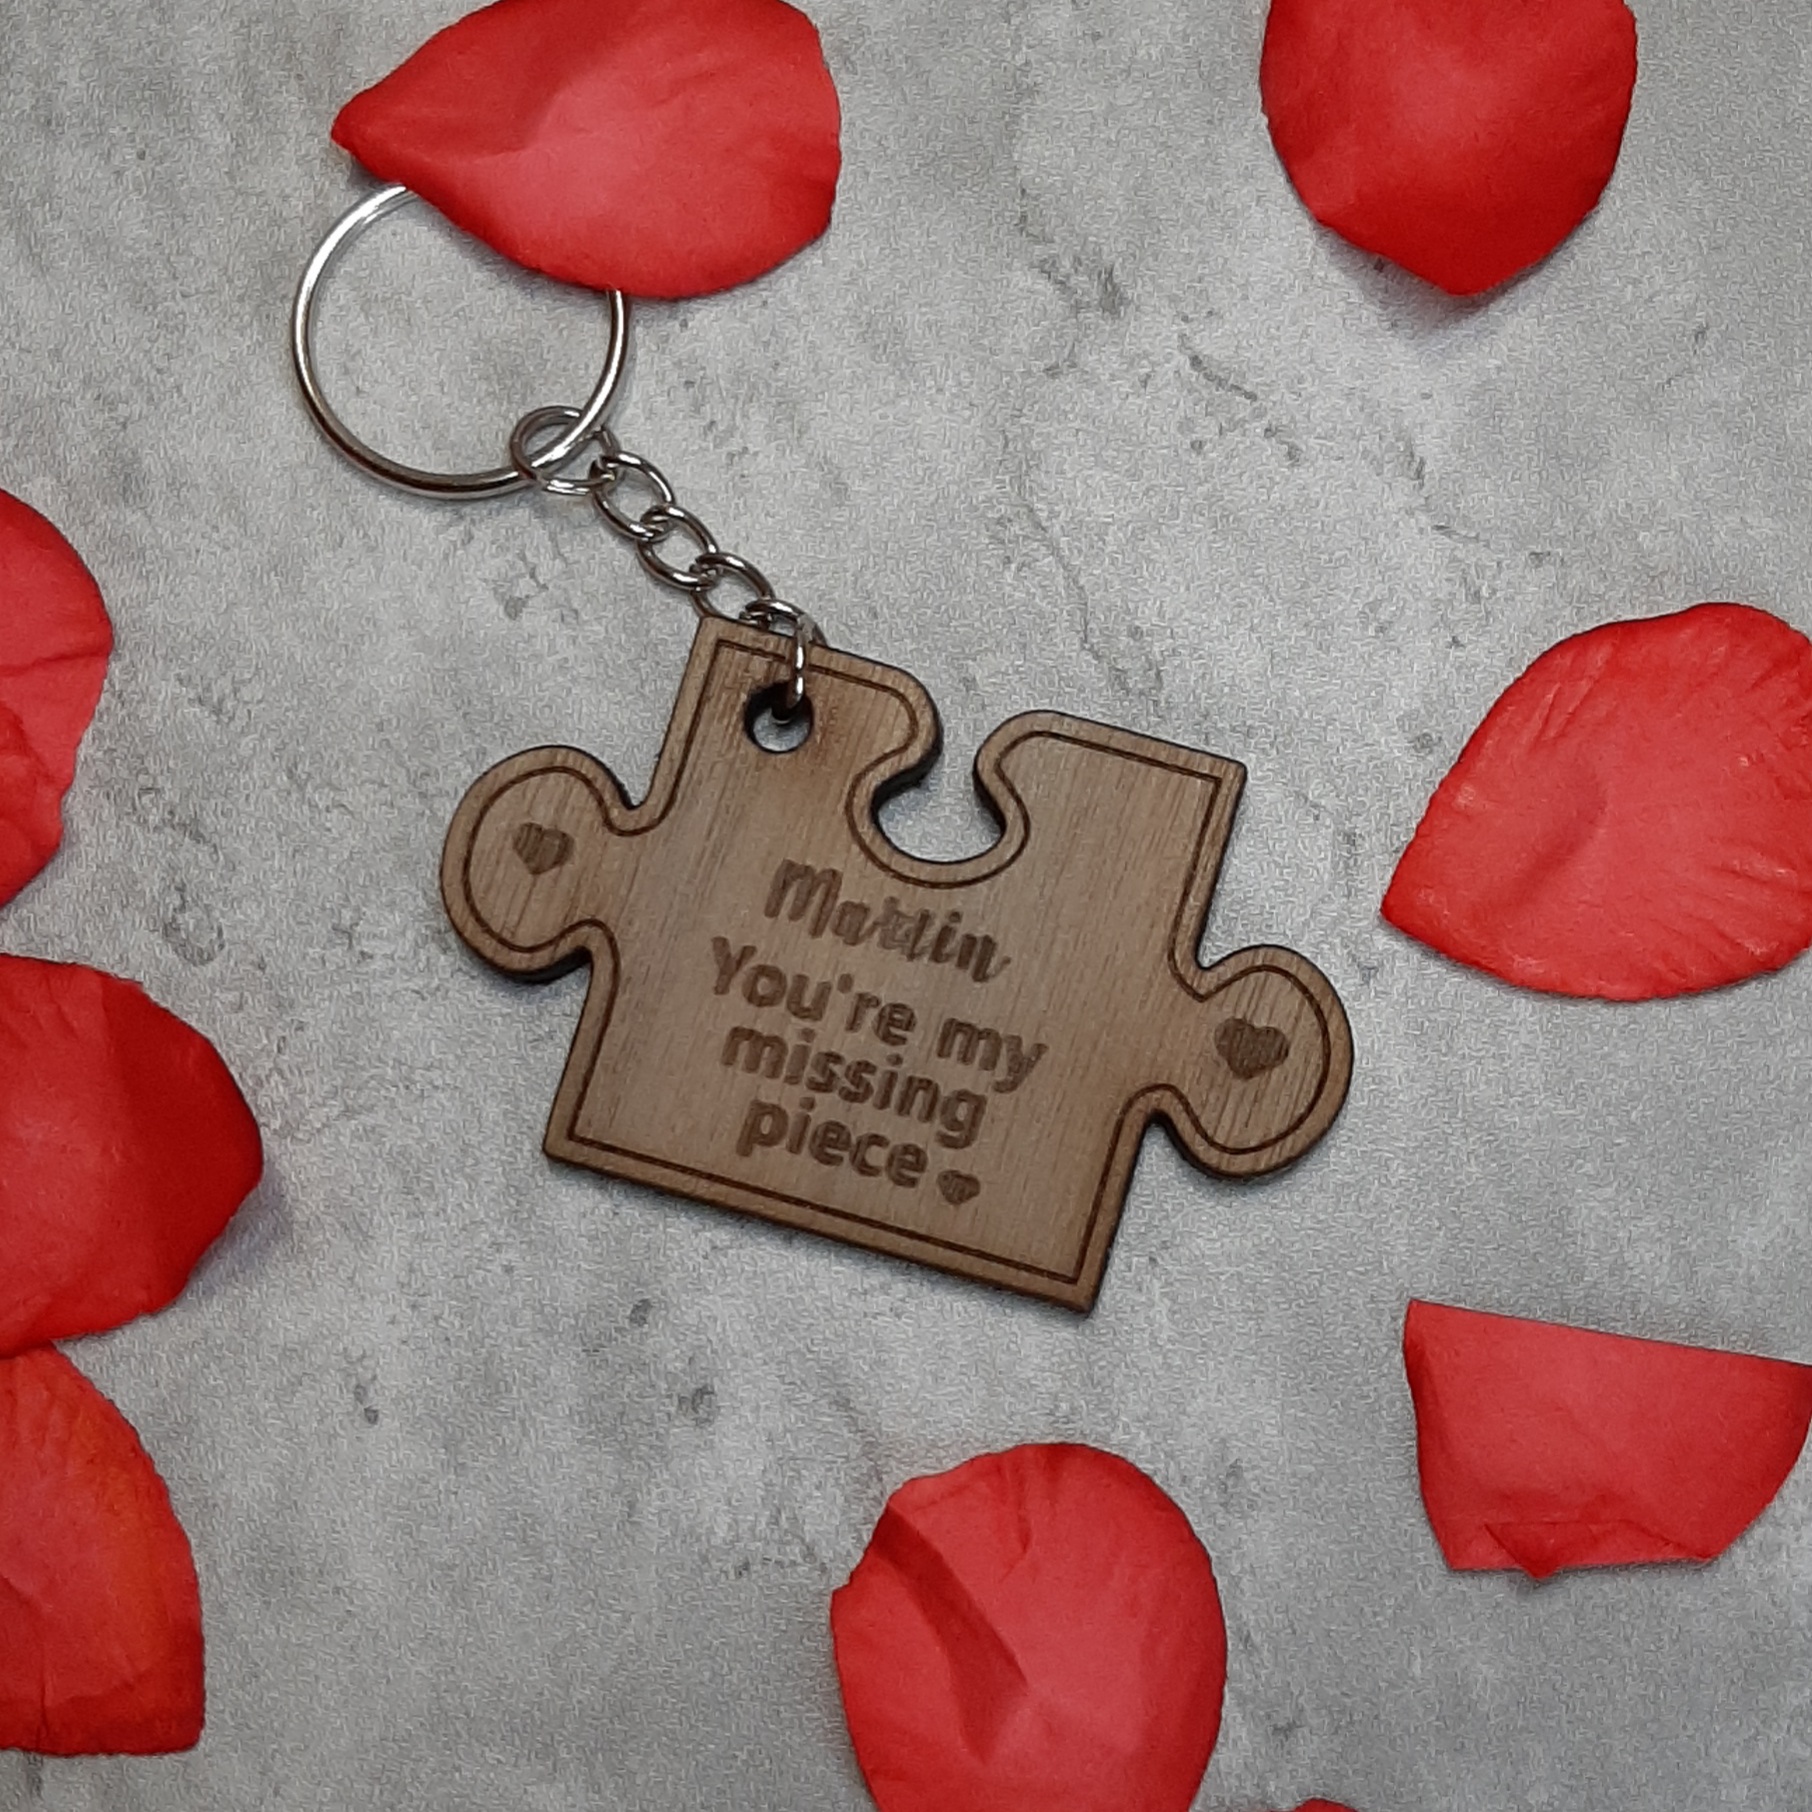 Missing Piece Puzzle Keyring surrounded by rose petals for valentines day, laser engraved with you're my missing piece